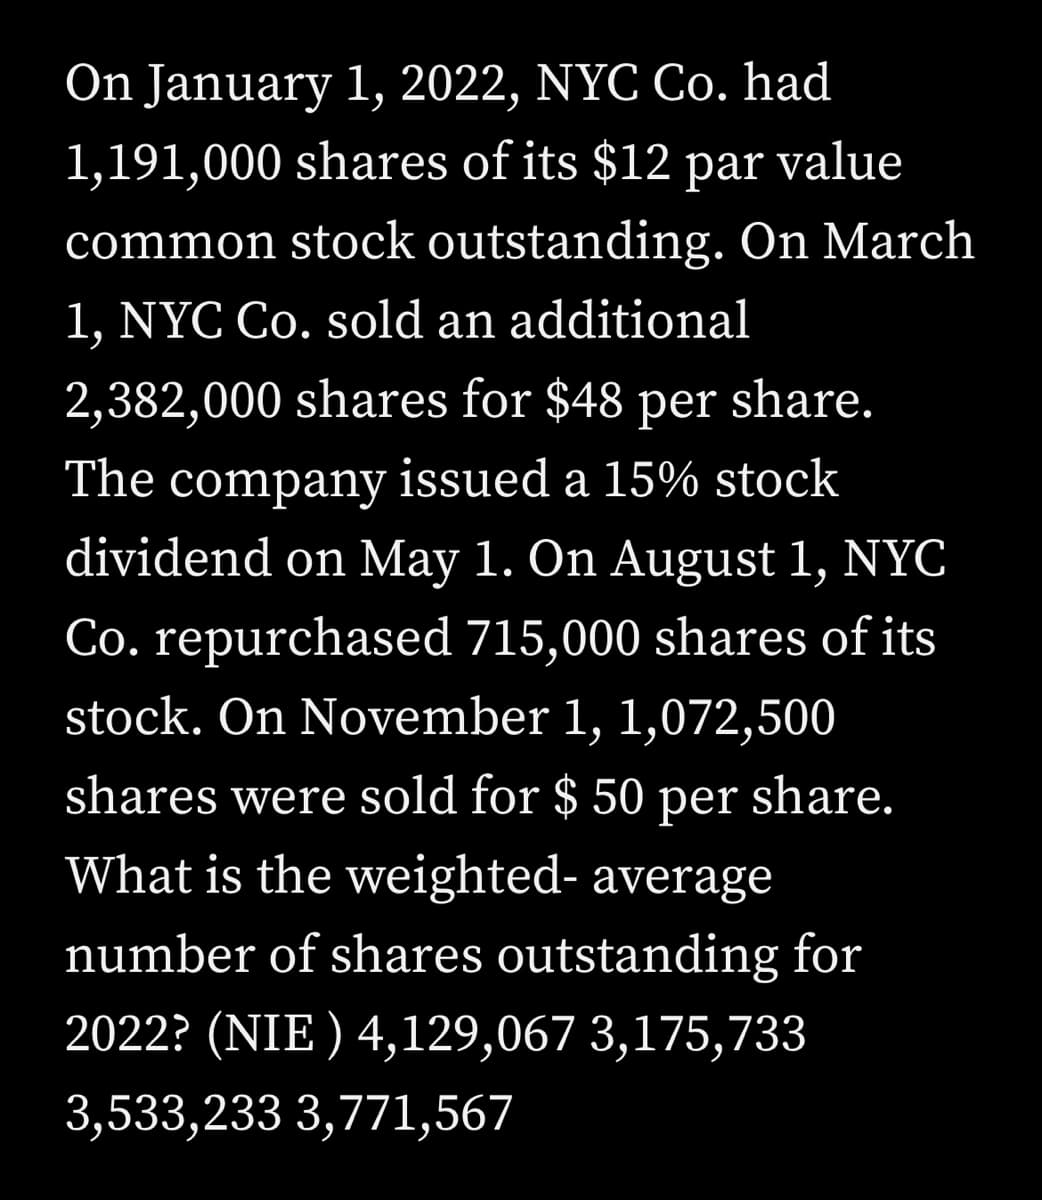 On January 1, 2022, NYC Co. had
1,191,000 shares of its $12 par value
common stock outstanding. On March
1, NYC Co. sold an additional
2,382,000 shares for $48 per share.
The company issued a 15% stock
dividend on May 1. On August 1, NYC
Co. repurchased 715,000 shares of its
stock. On November 1, 1,072,500
shares were sold for $50 per share.
What is the weighted- average
number of shares outstanding for
2022? (NIE) 4,129,067 3,175,733
3,533,233 3,771,567